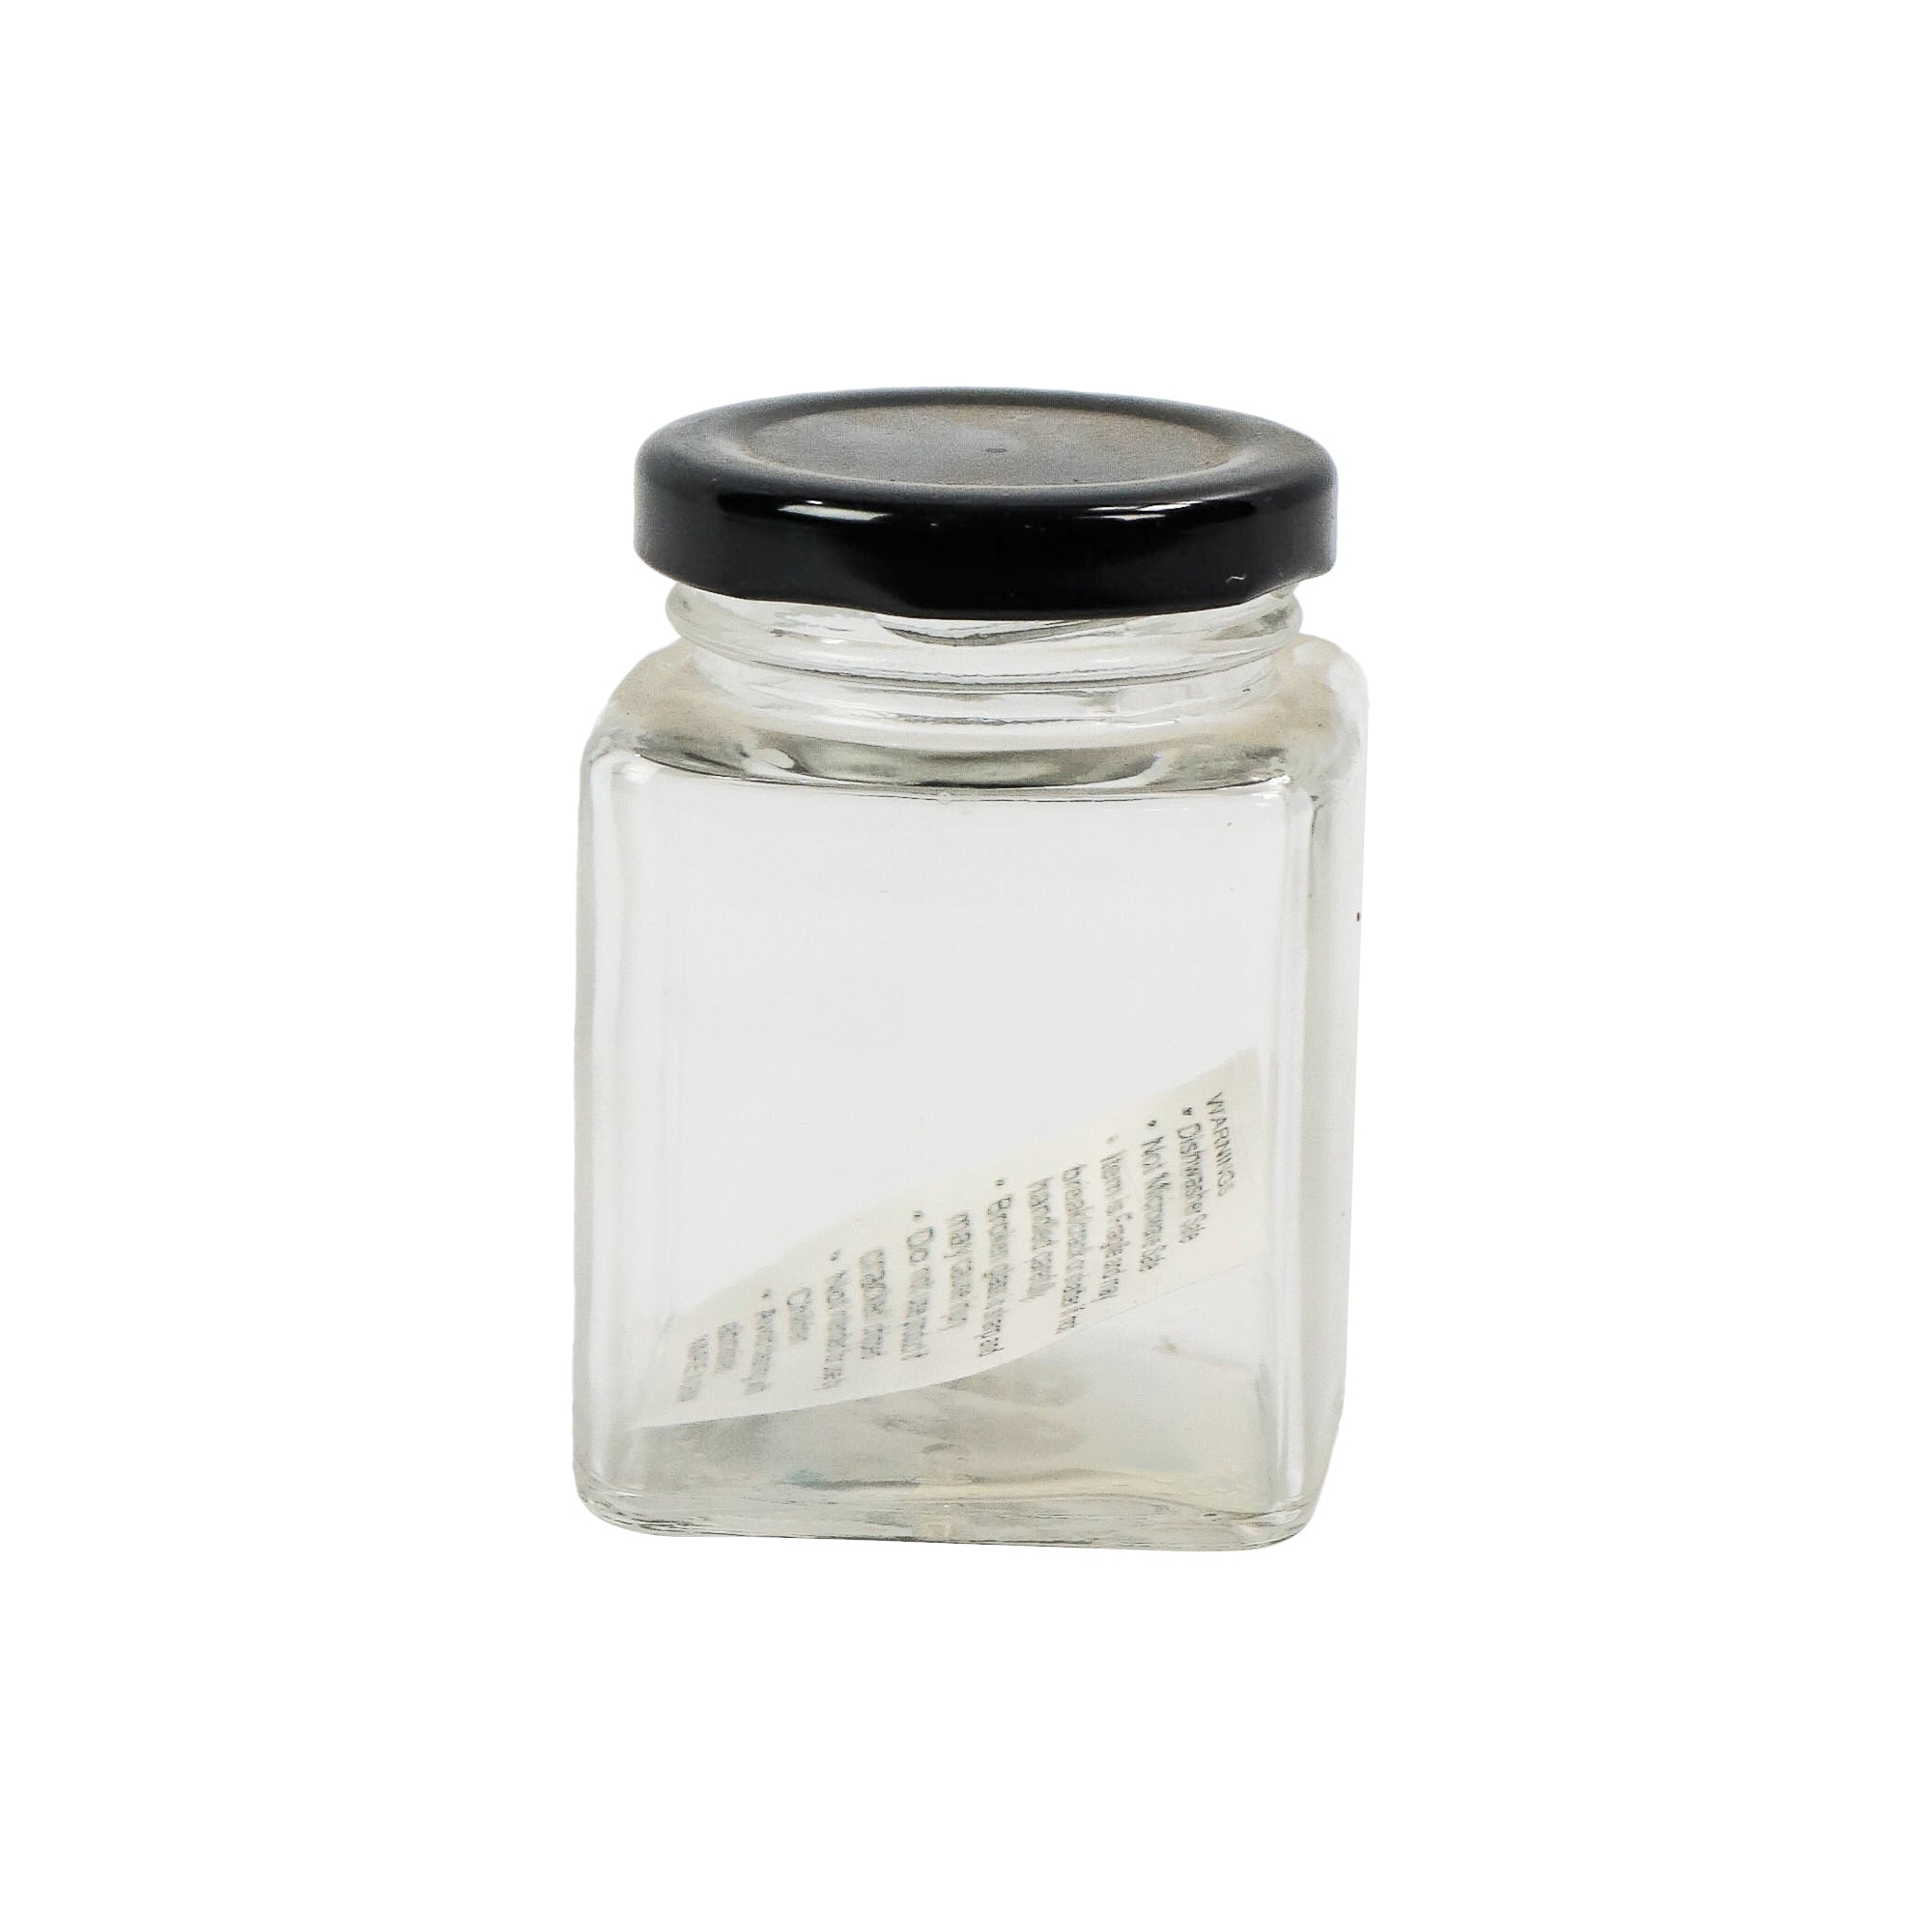 Consol 110ml Glass Jar Square with Back Lid